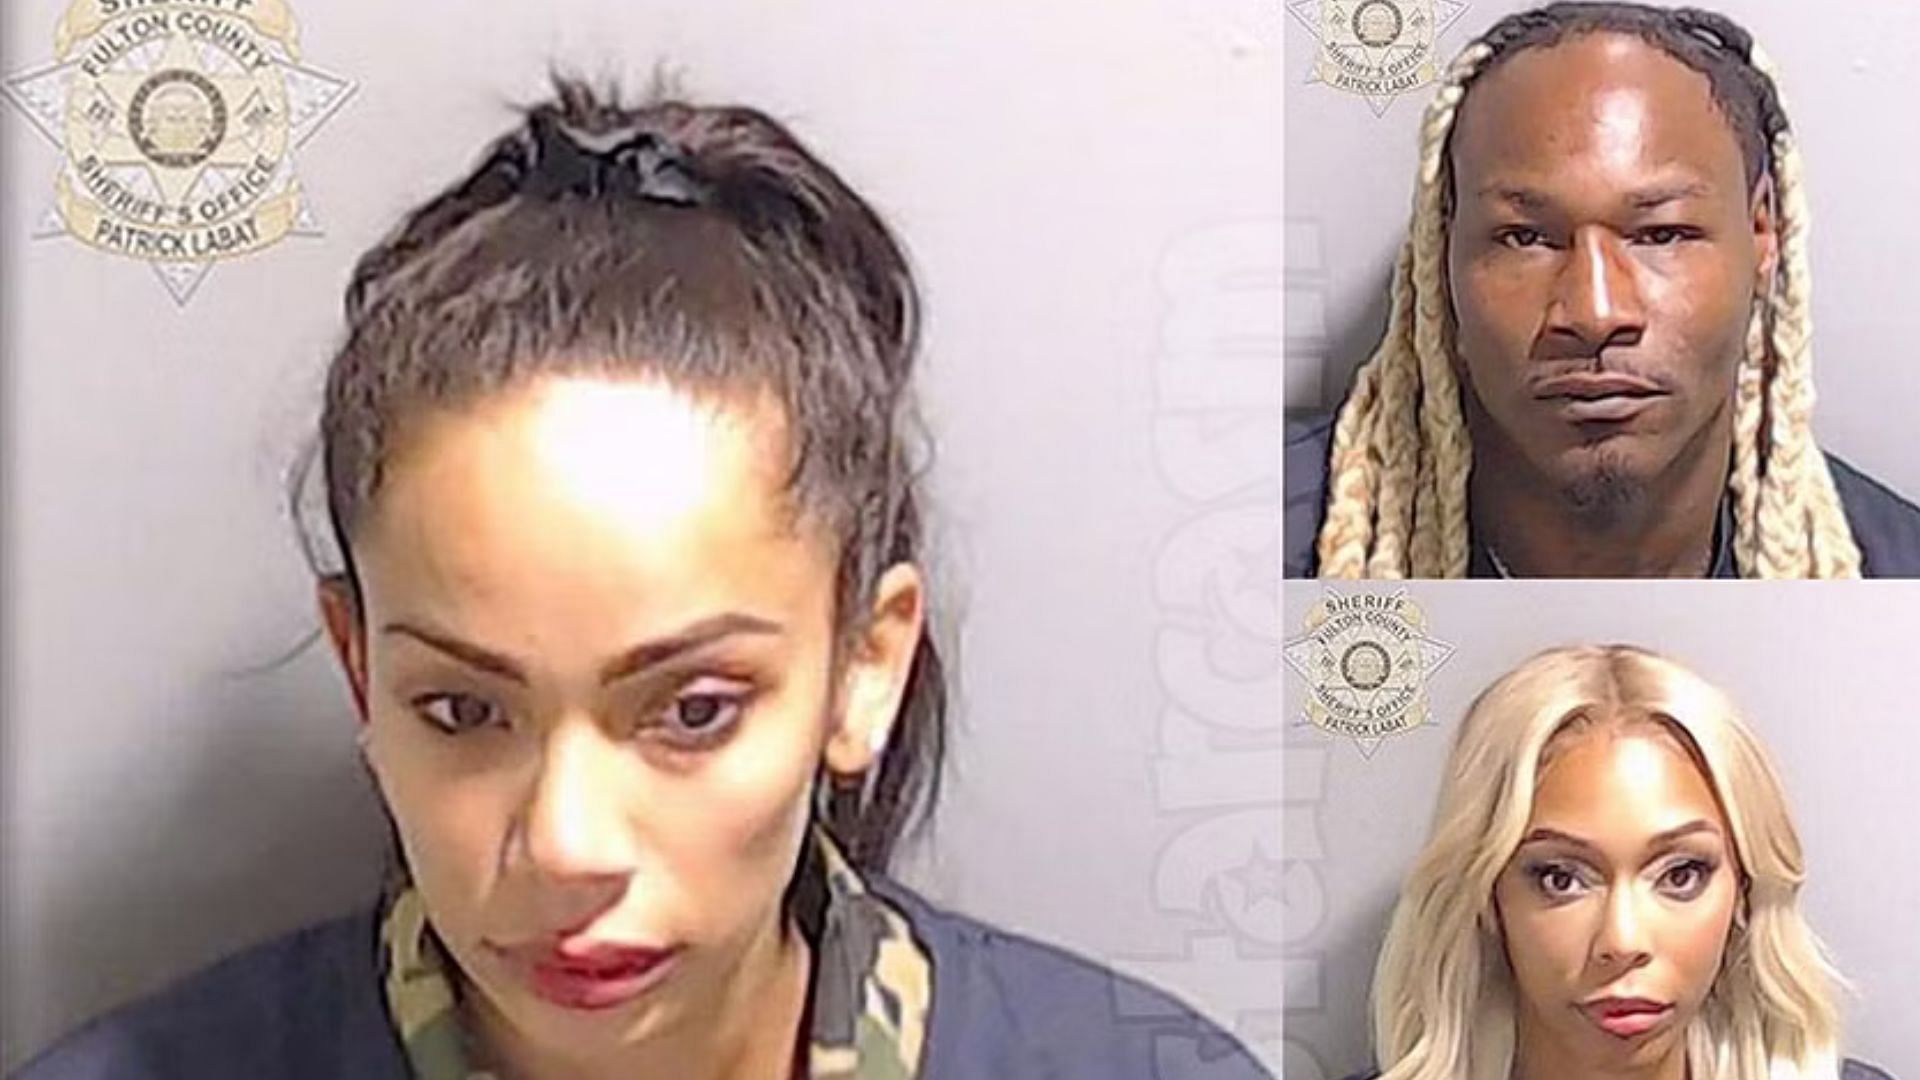 Why were Erica Mena and Bambi arrested? (Image via TMZ)